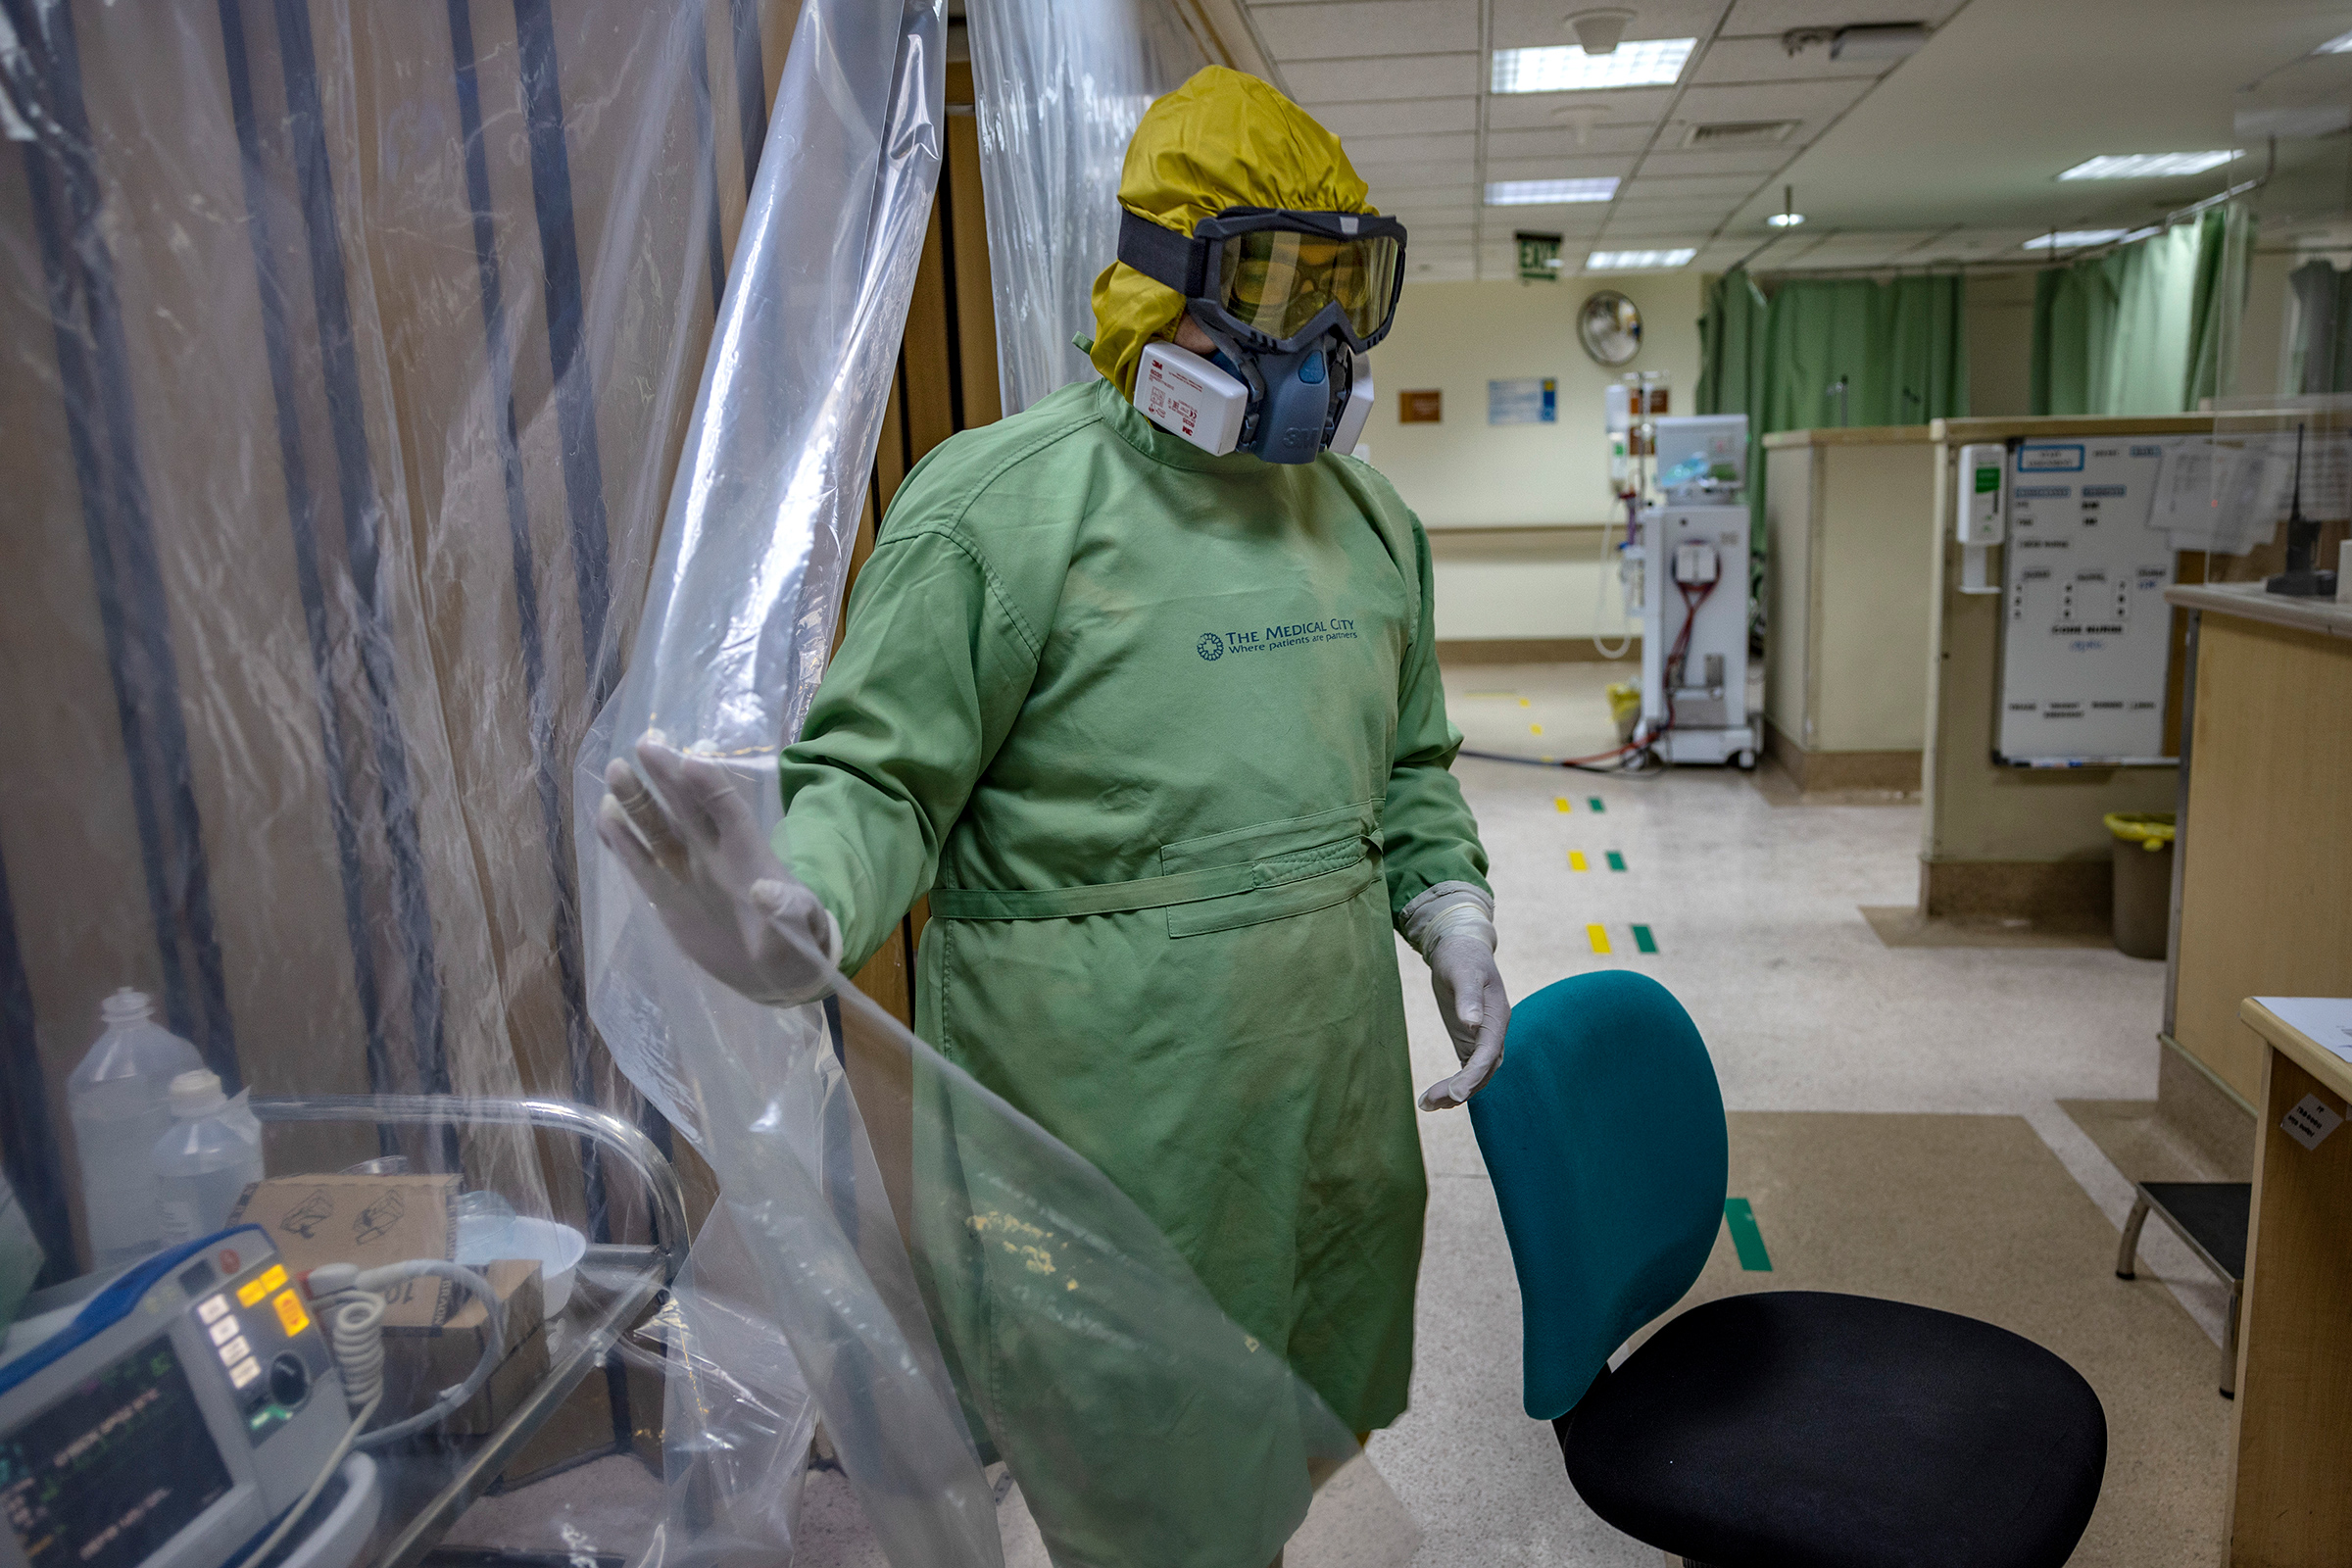 Dr. Alejandro Umali wears personal protective equipment inside the COVID-19 ward on April 26. (Ezra Acayan—Getty Images)